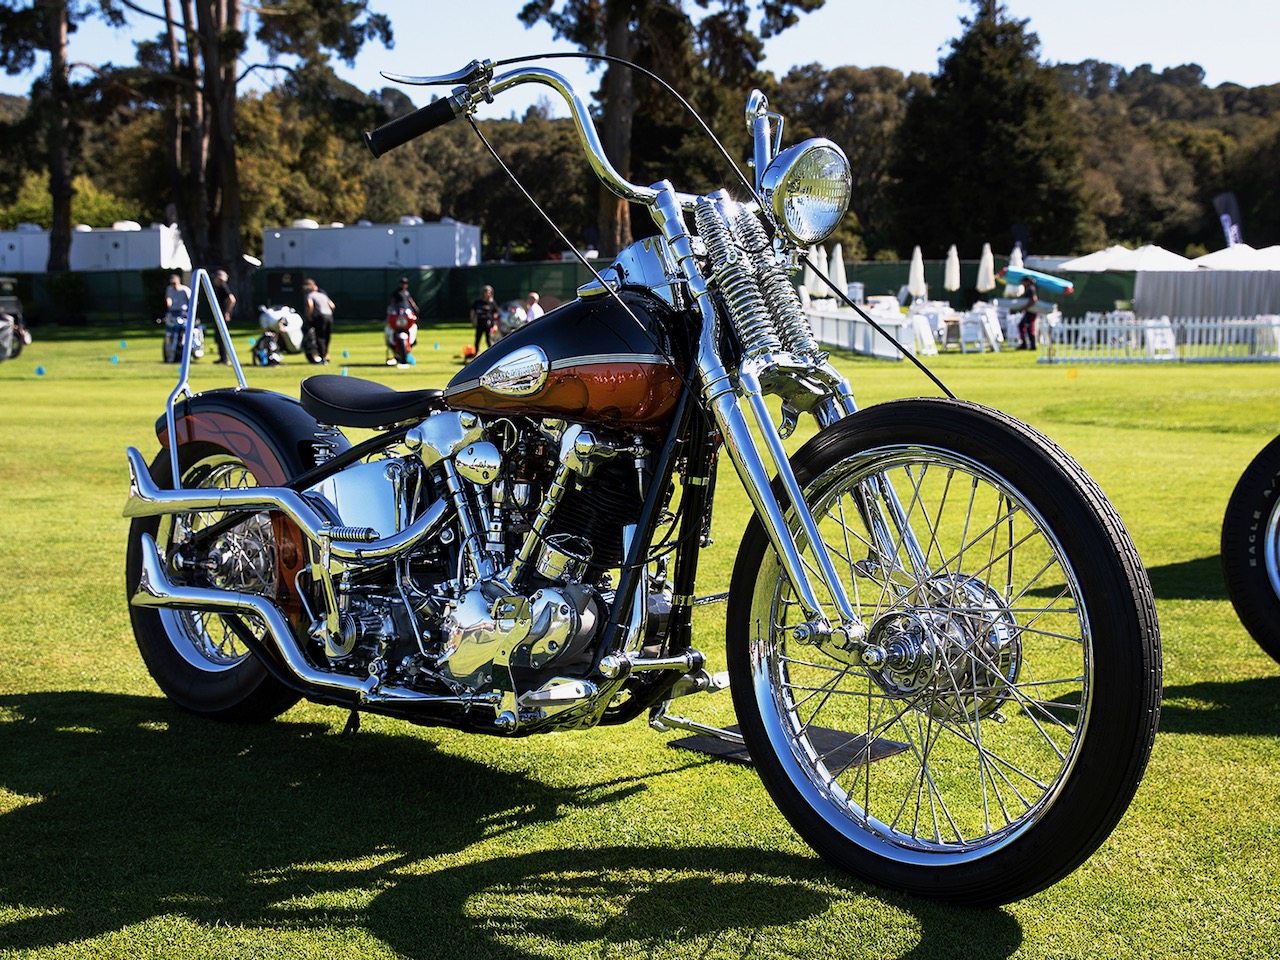 12TH ANNUAL QUAIL MOTORCYCLE GATHERING